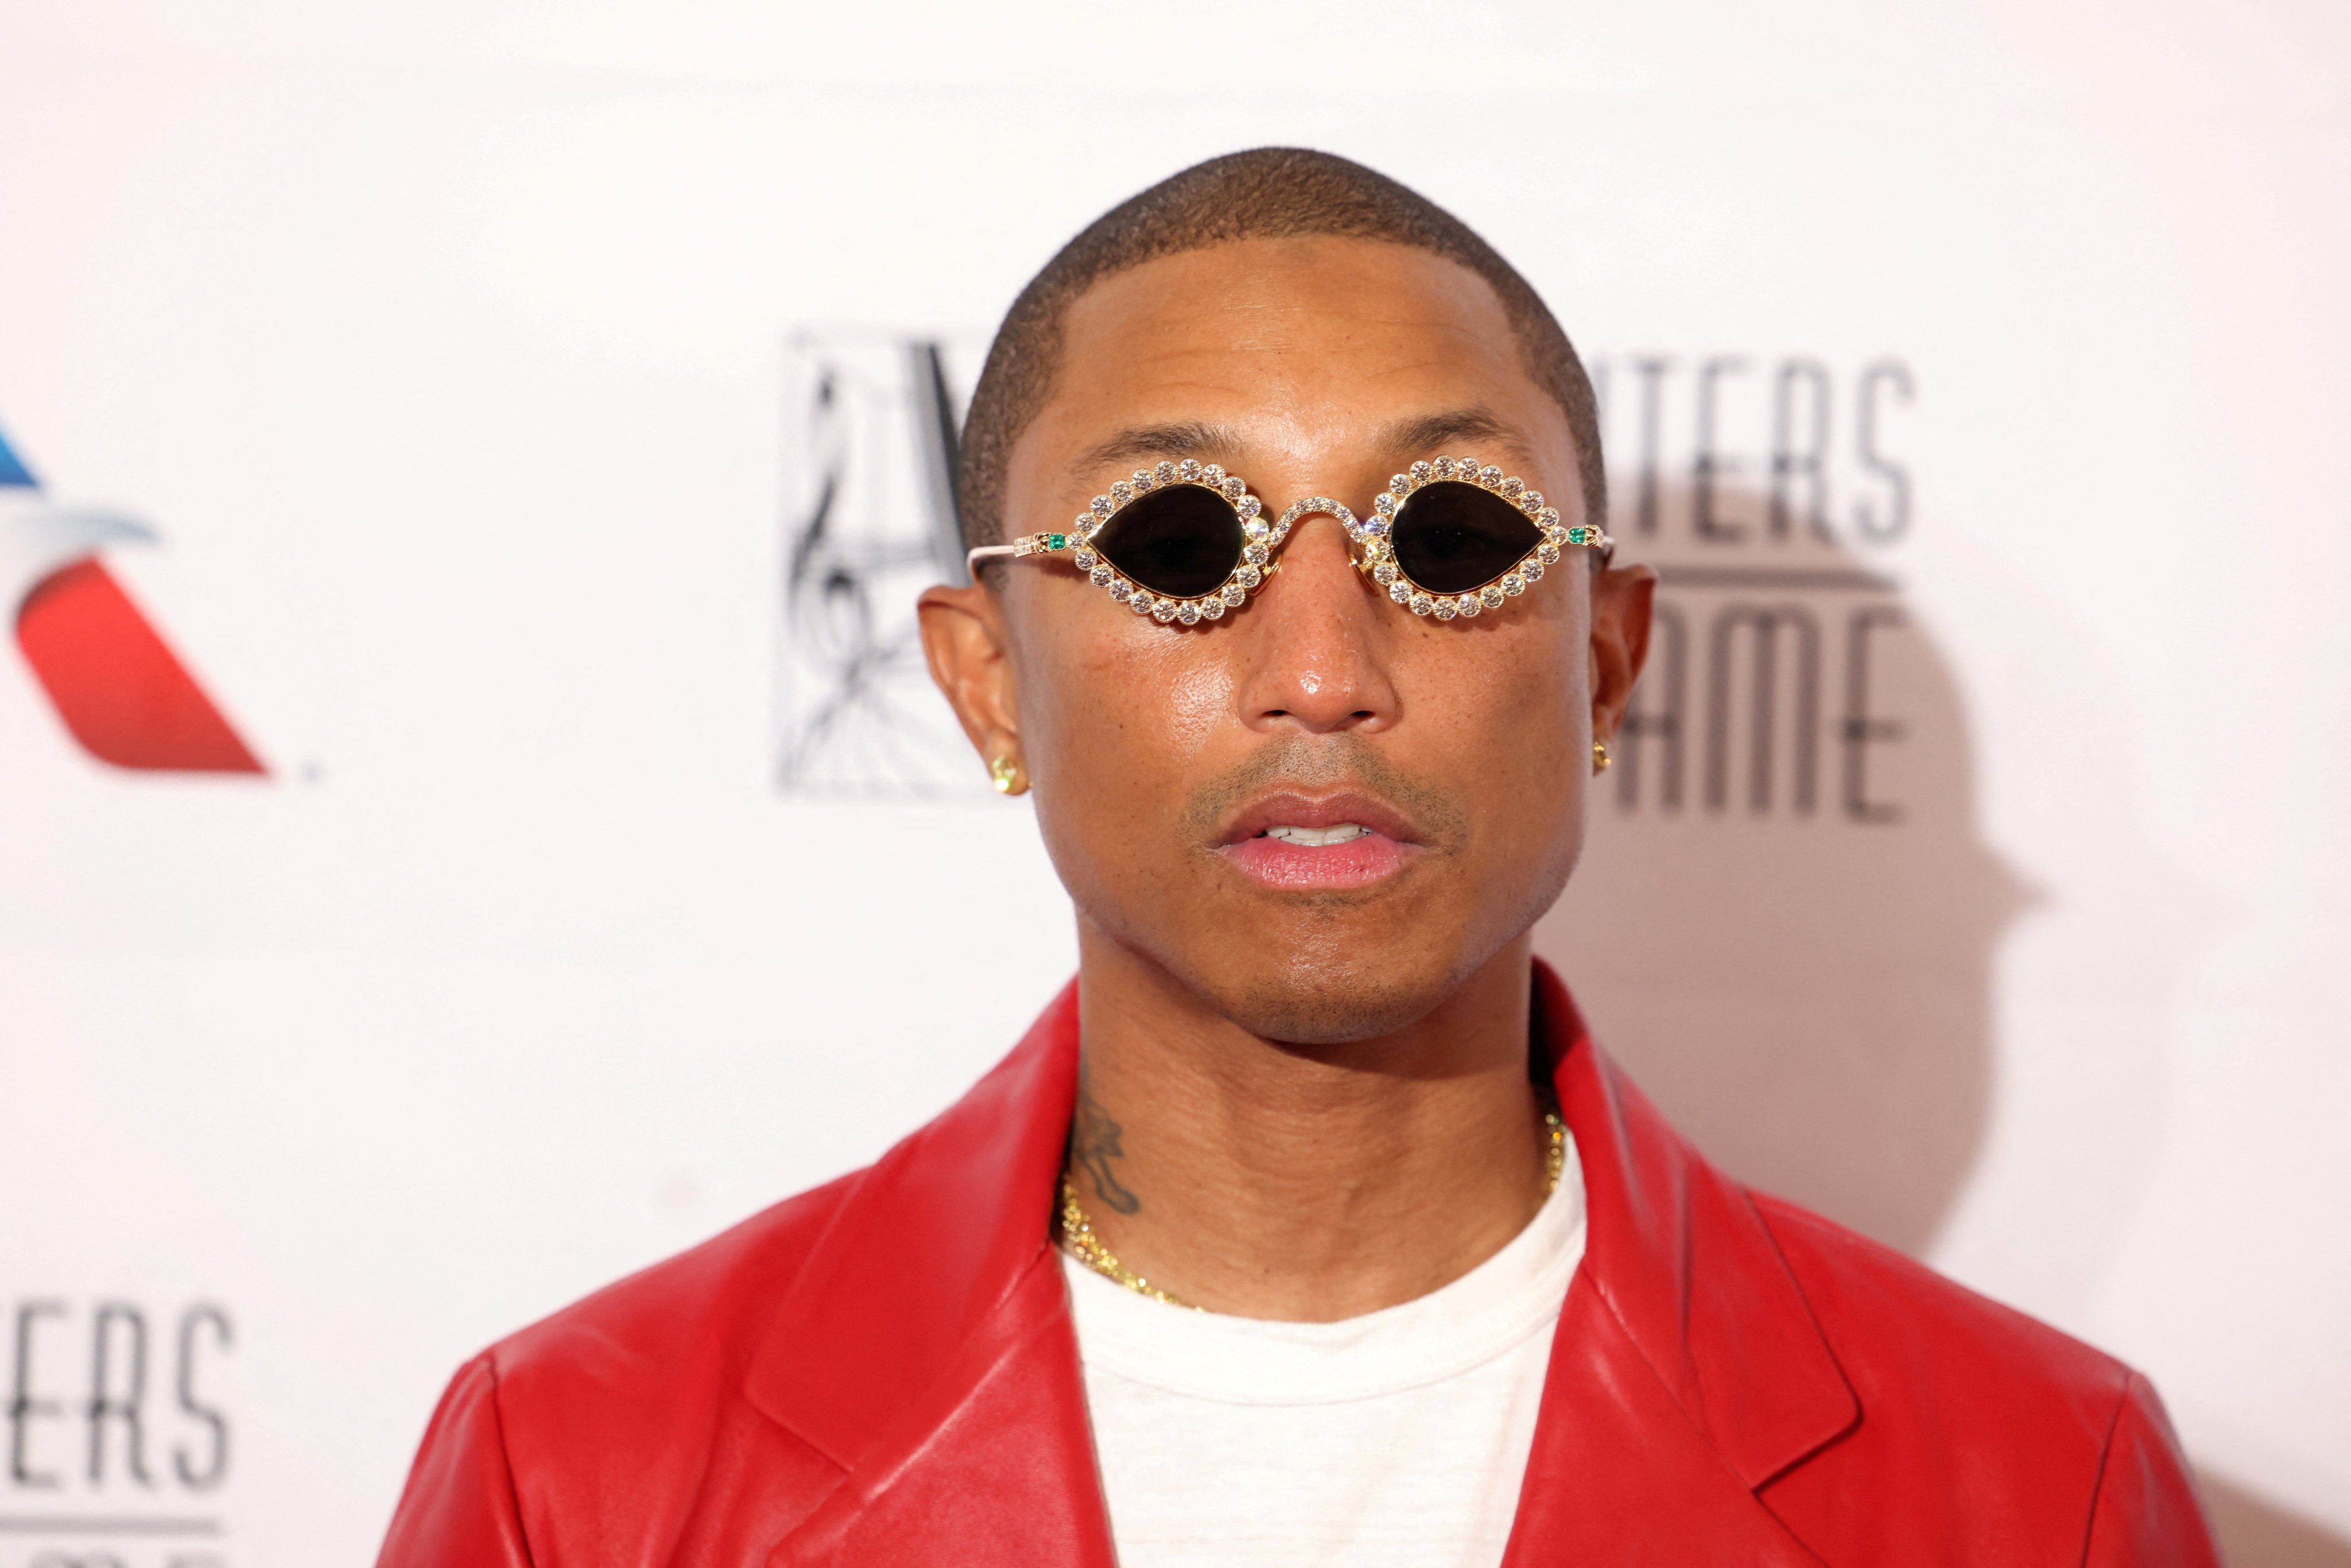 Pharrell Williams at Louis Vuitton Is the Culmination of a